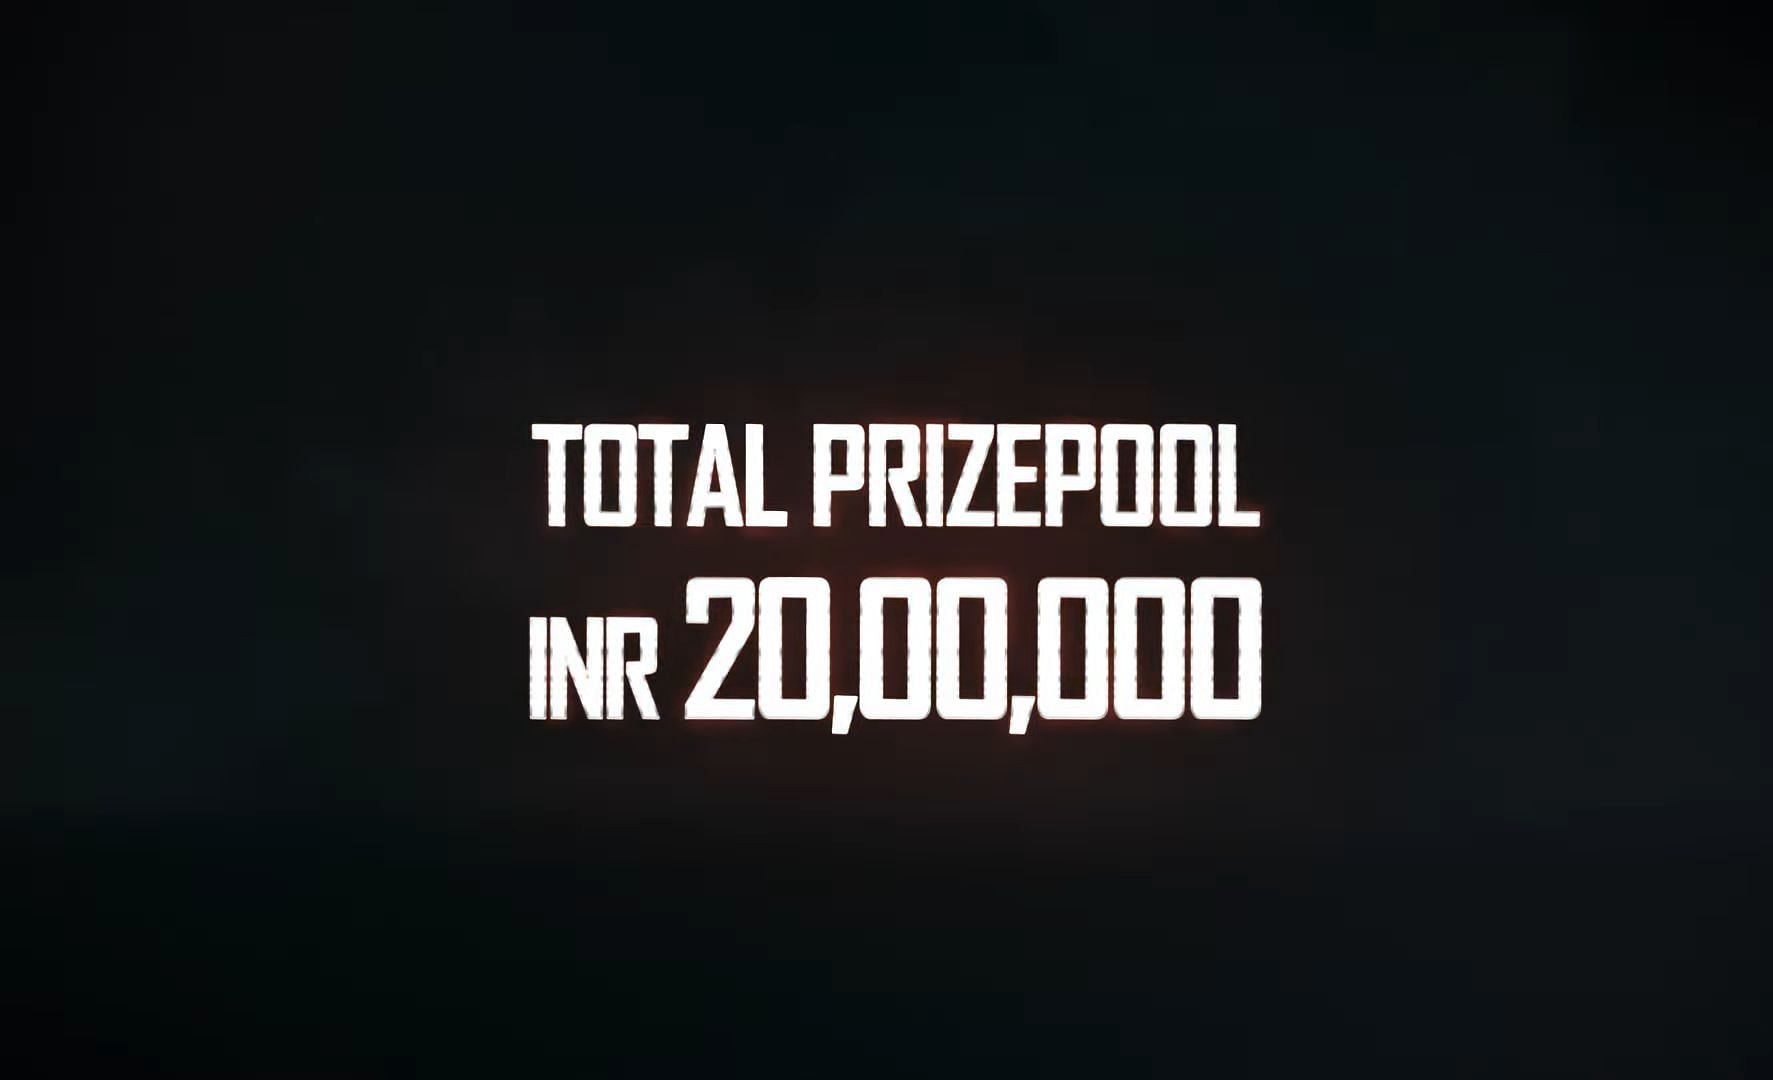 The tournament has a prize pool of ₹20,00,000 (Image via Jagran Play)